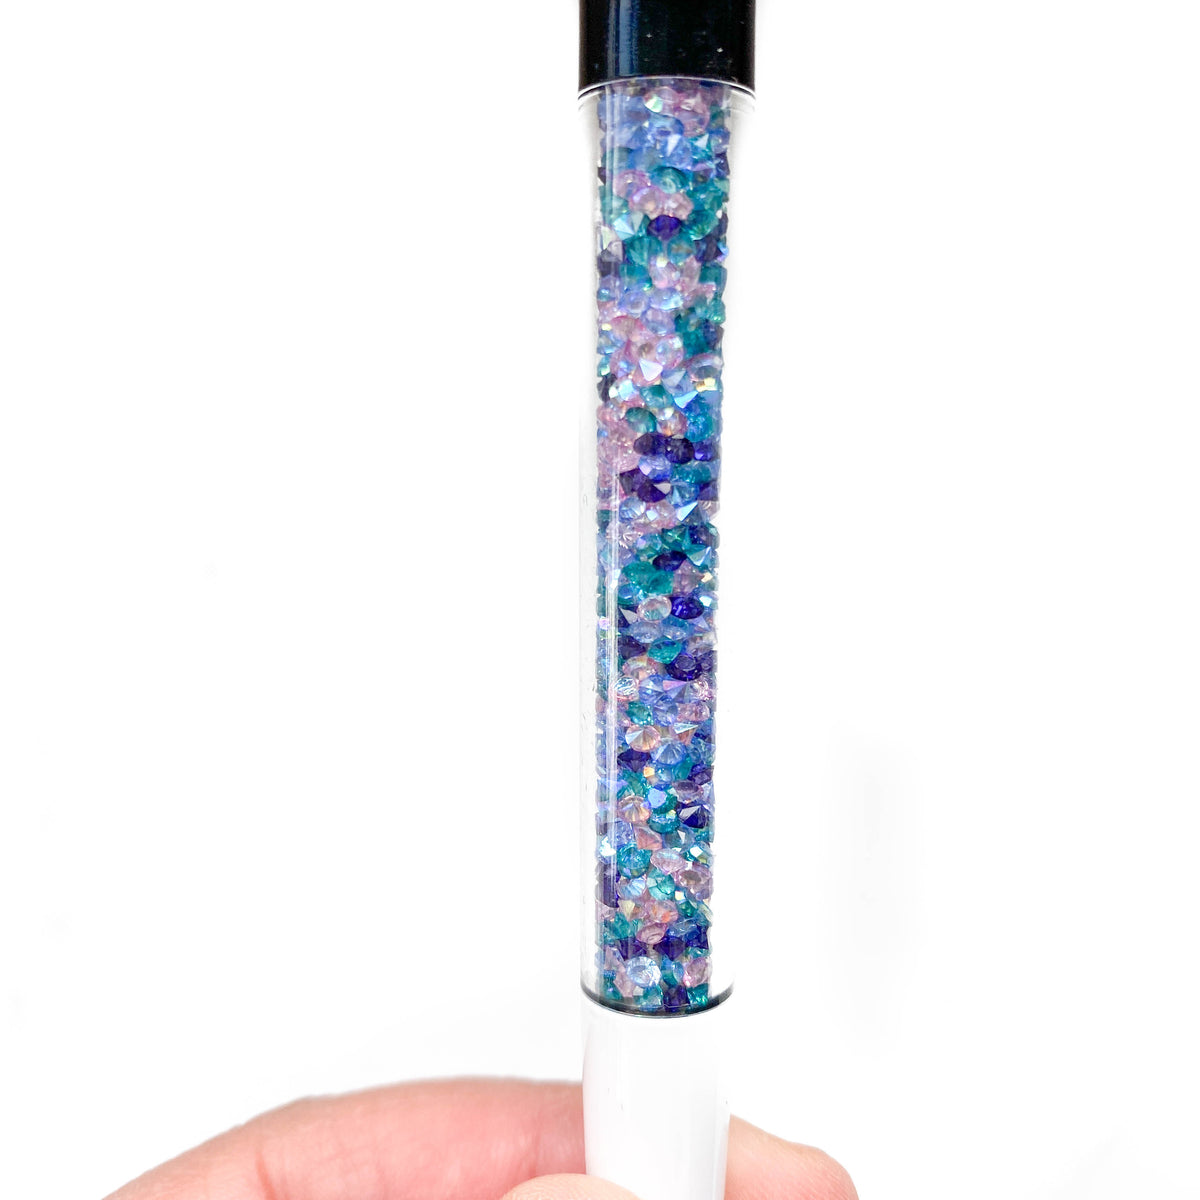 Stay Cool Crystal VBPen | limited pen